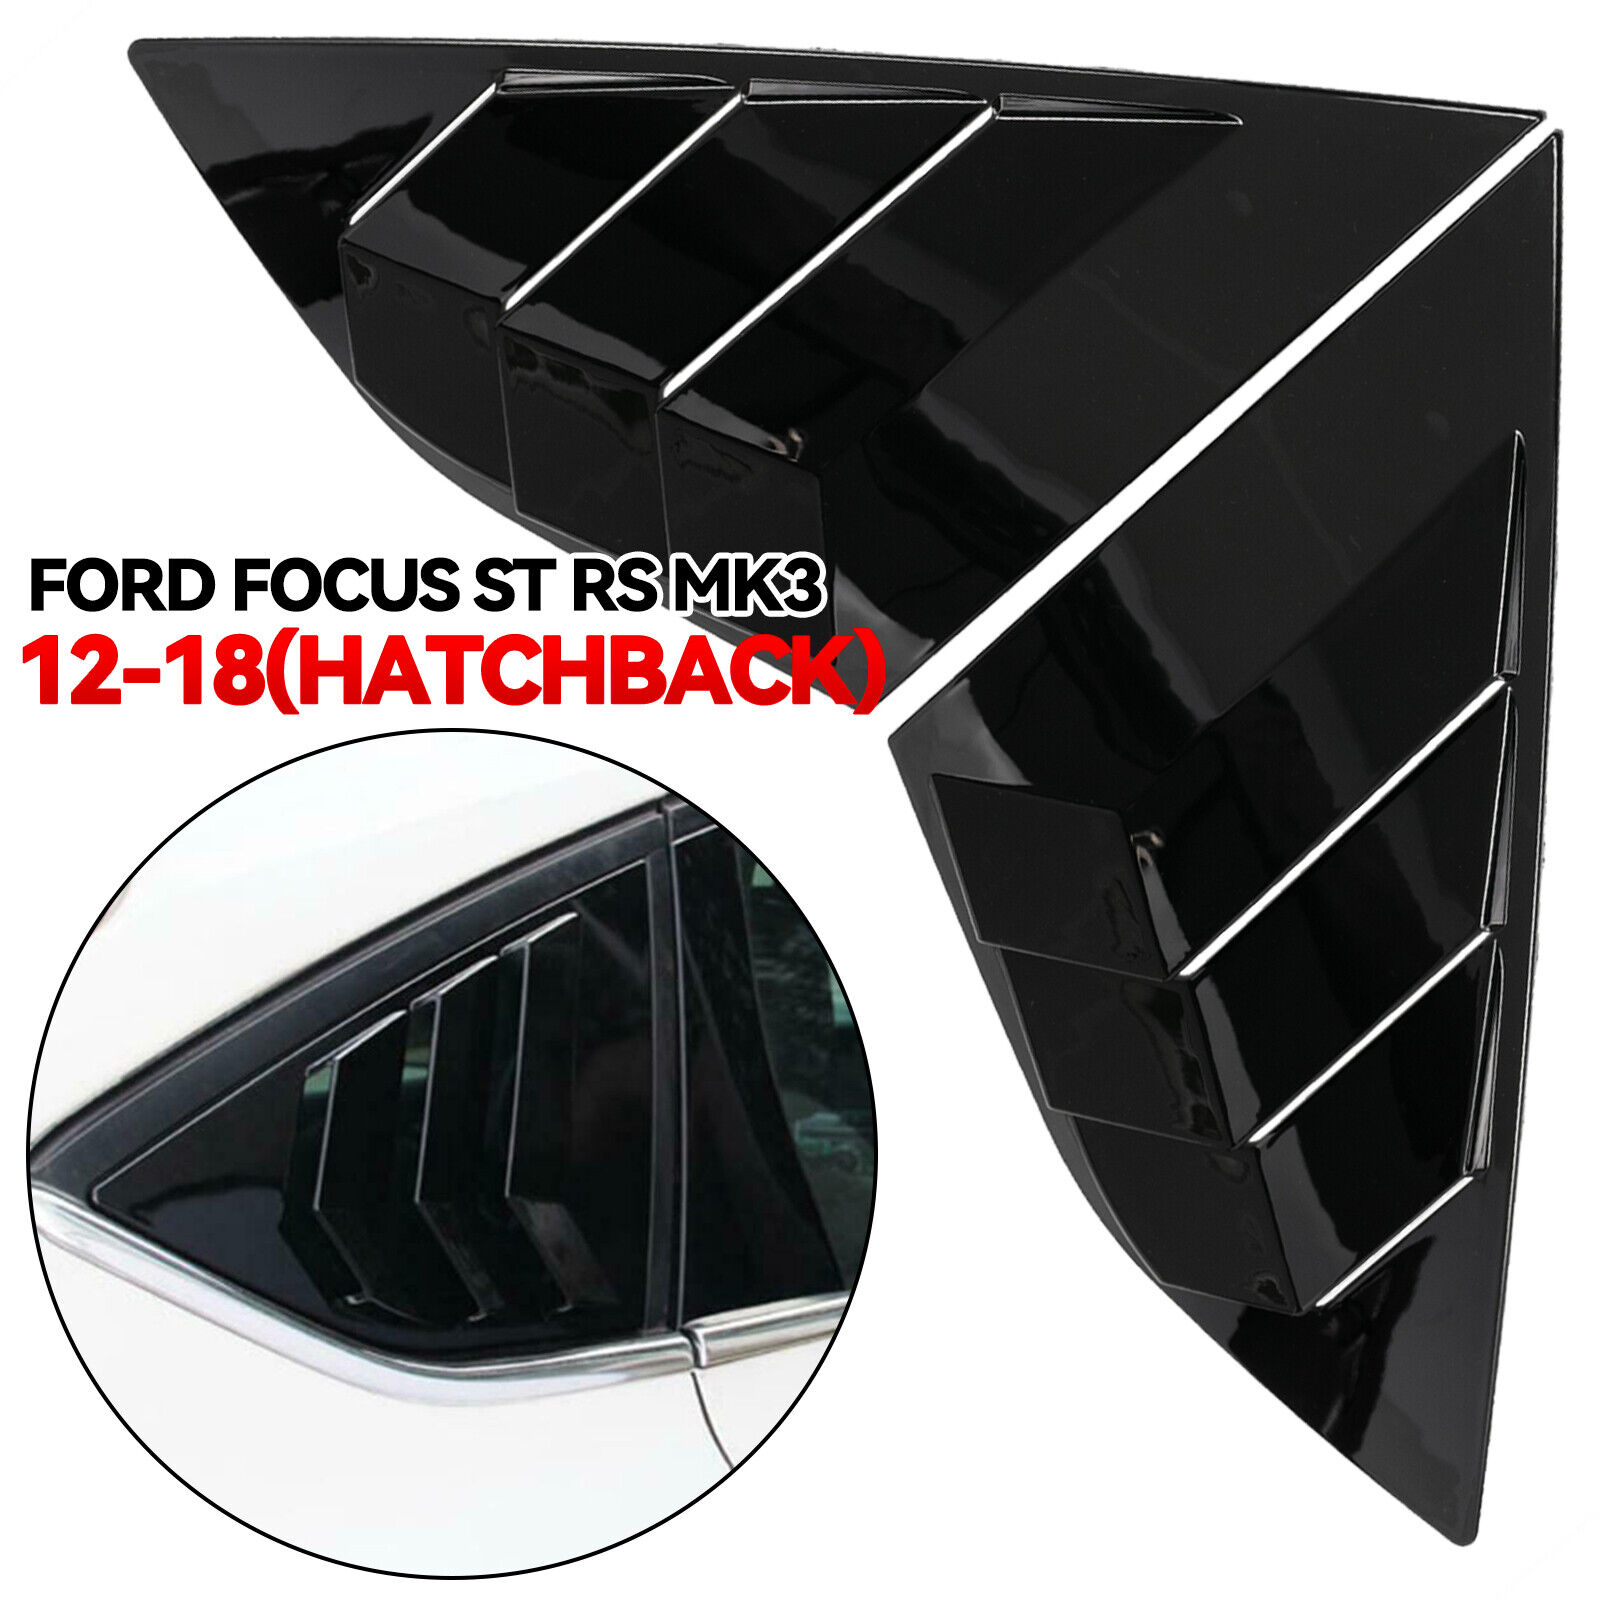 Gloss Black Window Louver Rear Side Vent Cover For  2012-18 Ford Focus ST RS MK3